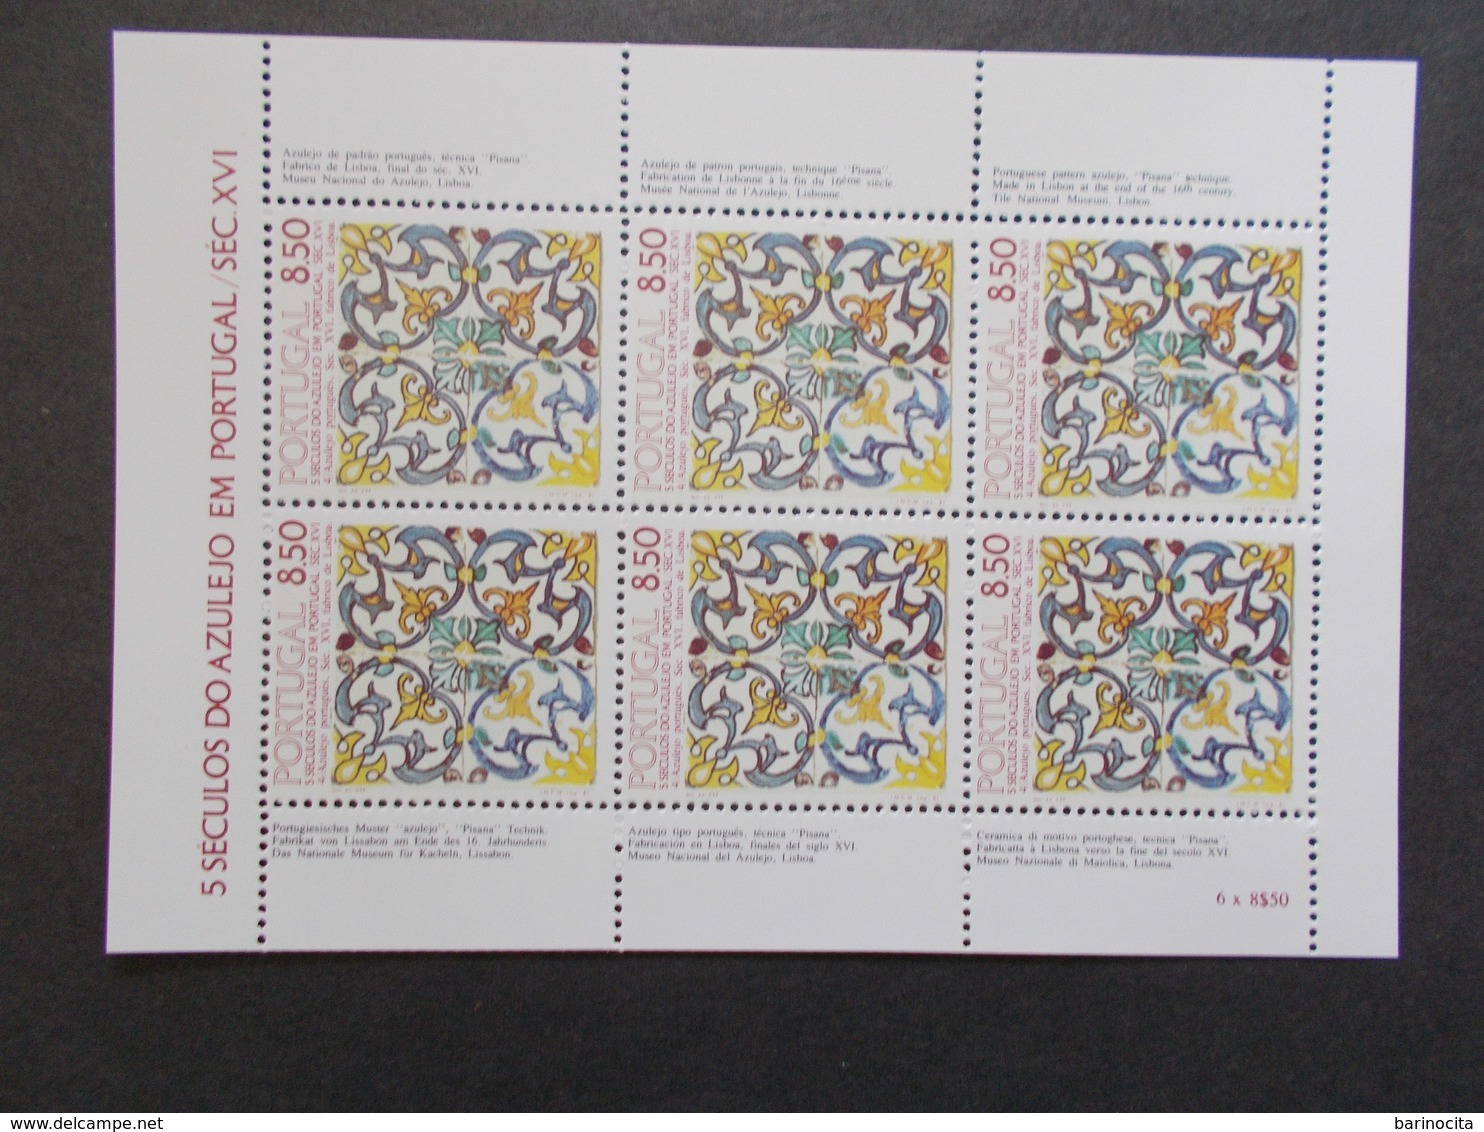 PORTUGAL   -  FEUILLES  Complete  Di Timbres   N° 1529 A   Année 1981   Neuf XX   ( Voir Photo )  48 - Full Sheets & Multiples